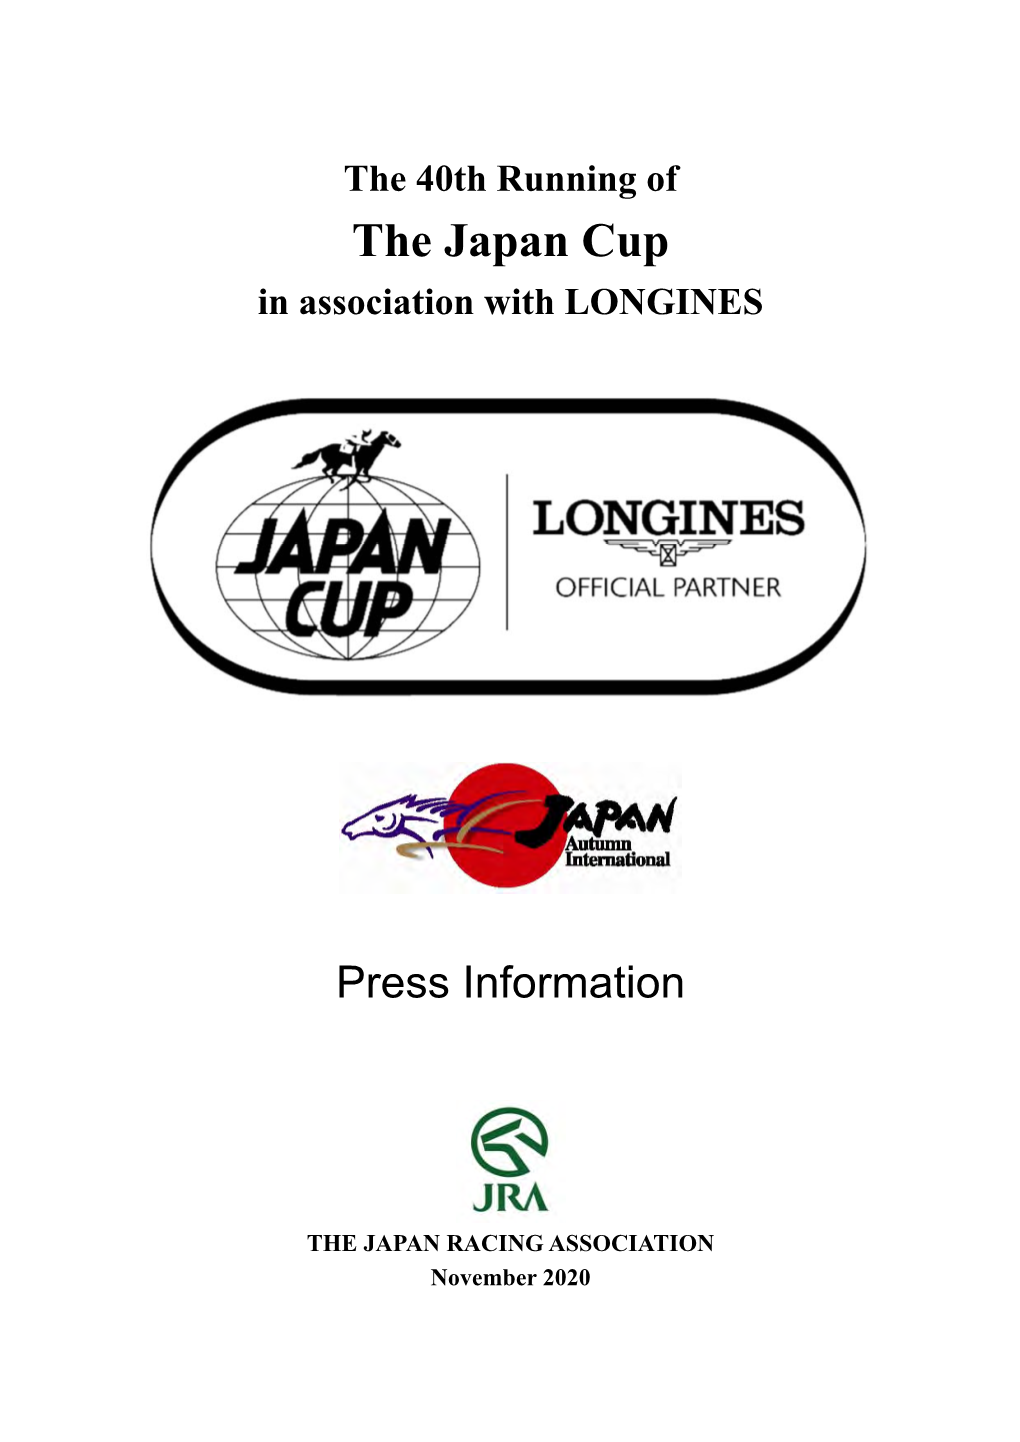 The Japan Cup in Association with LONGINES